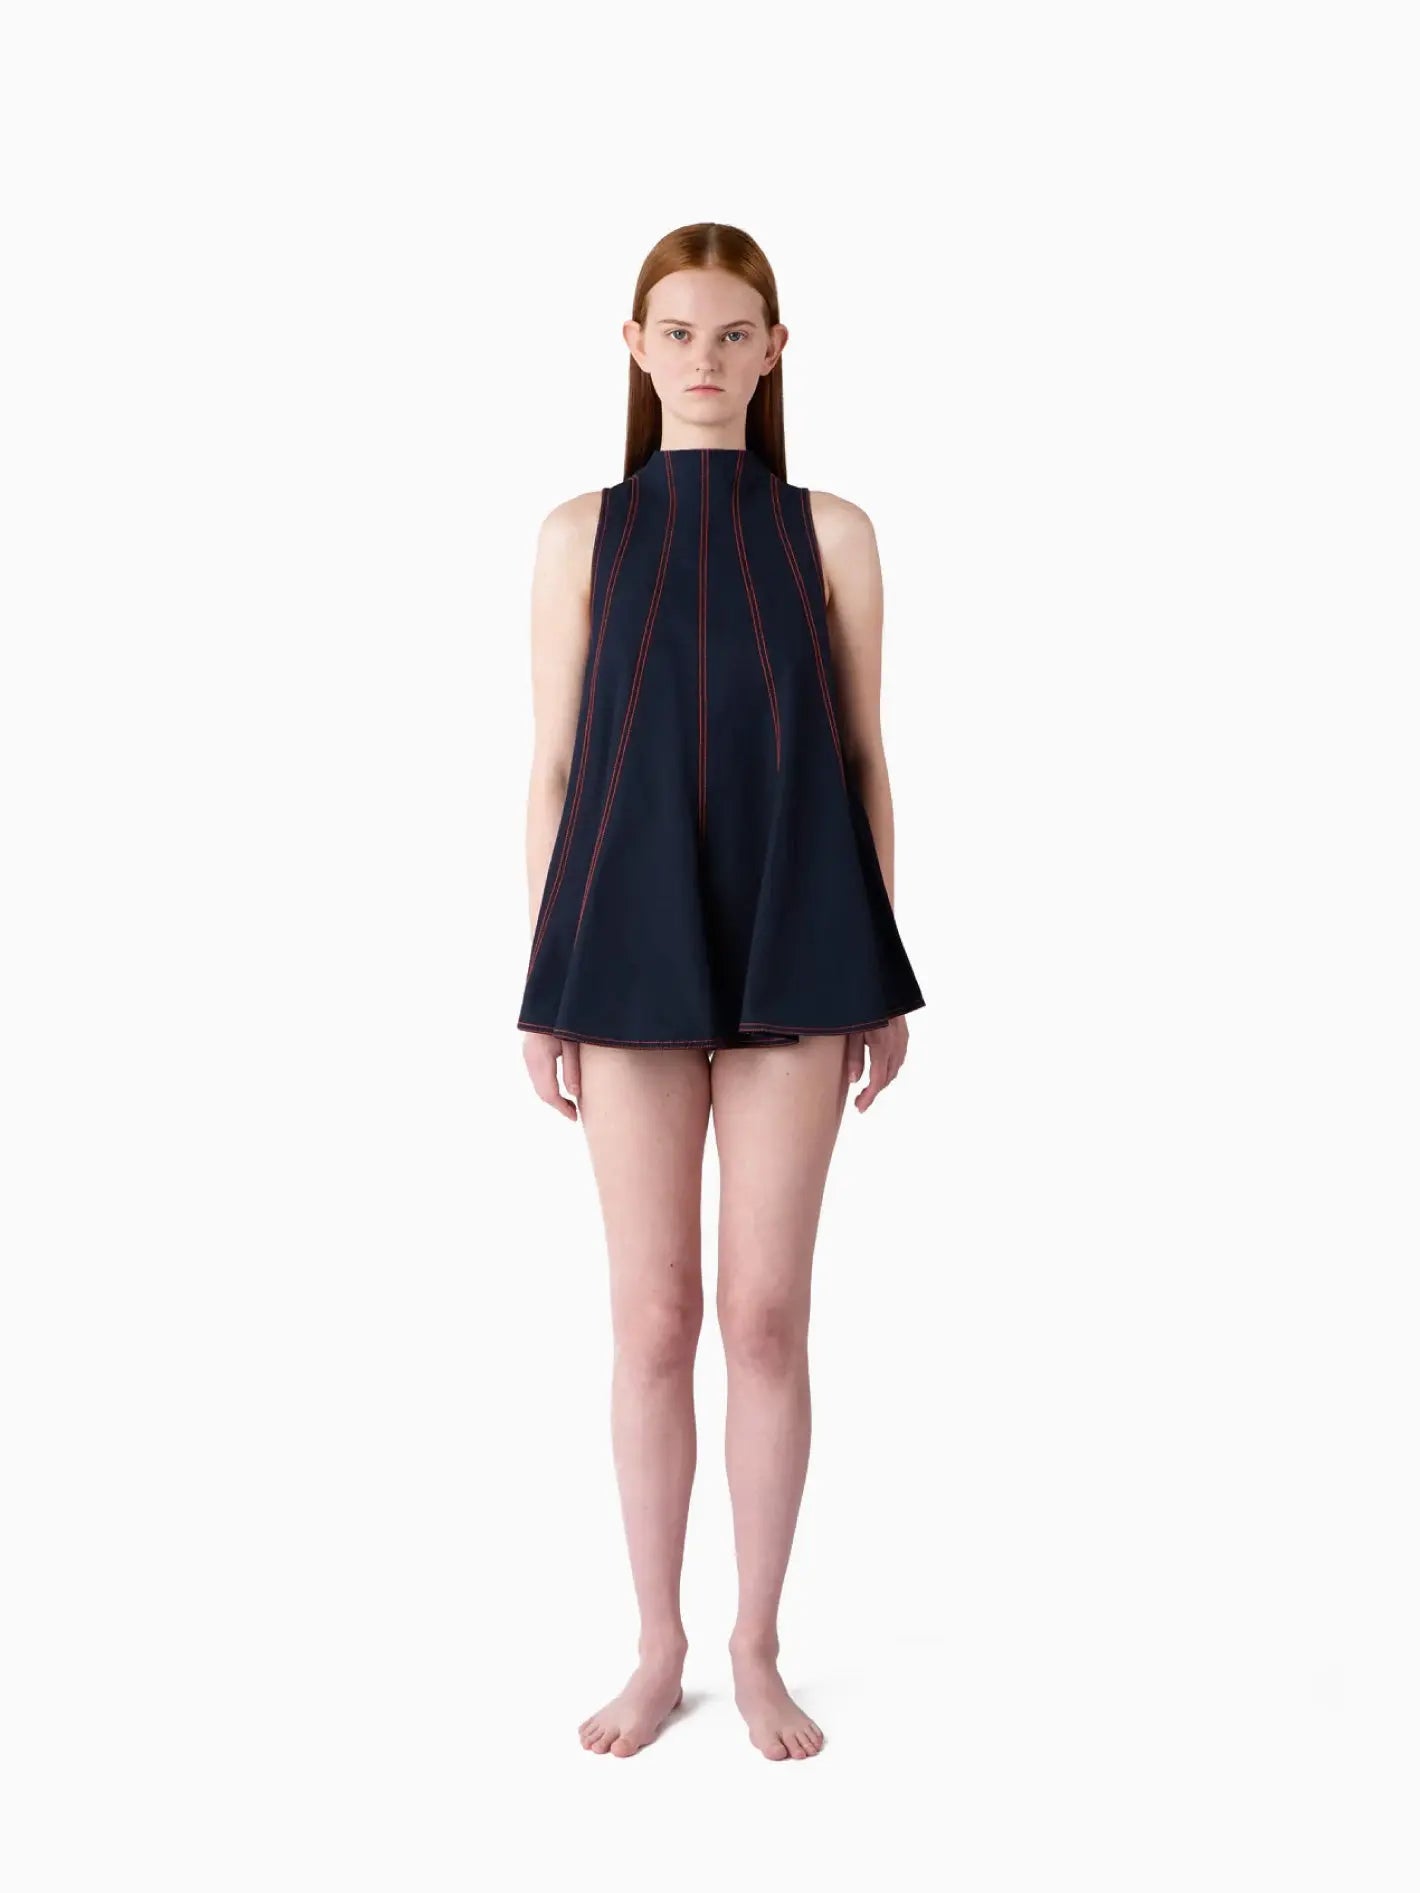 A sleeveless, navy blue Tulipano Top from Sunnei with red vertical stitching lines from the neckline to the hem. The top has a flared, A-line silhouette and is photographed against a plain white background. This stylish piece embodies the chic fashion of Barcelona.